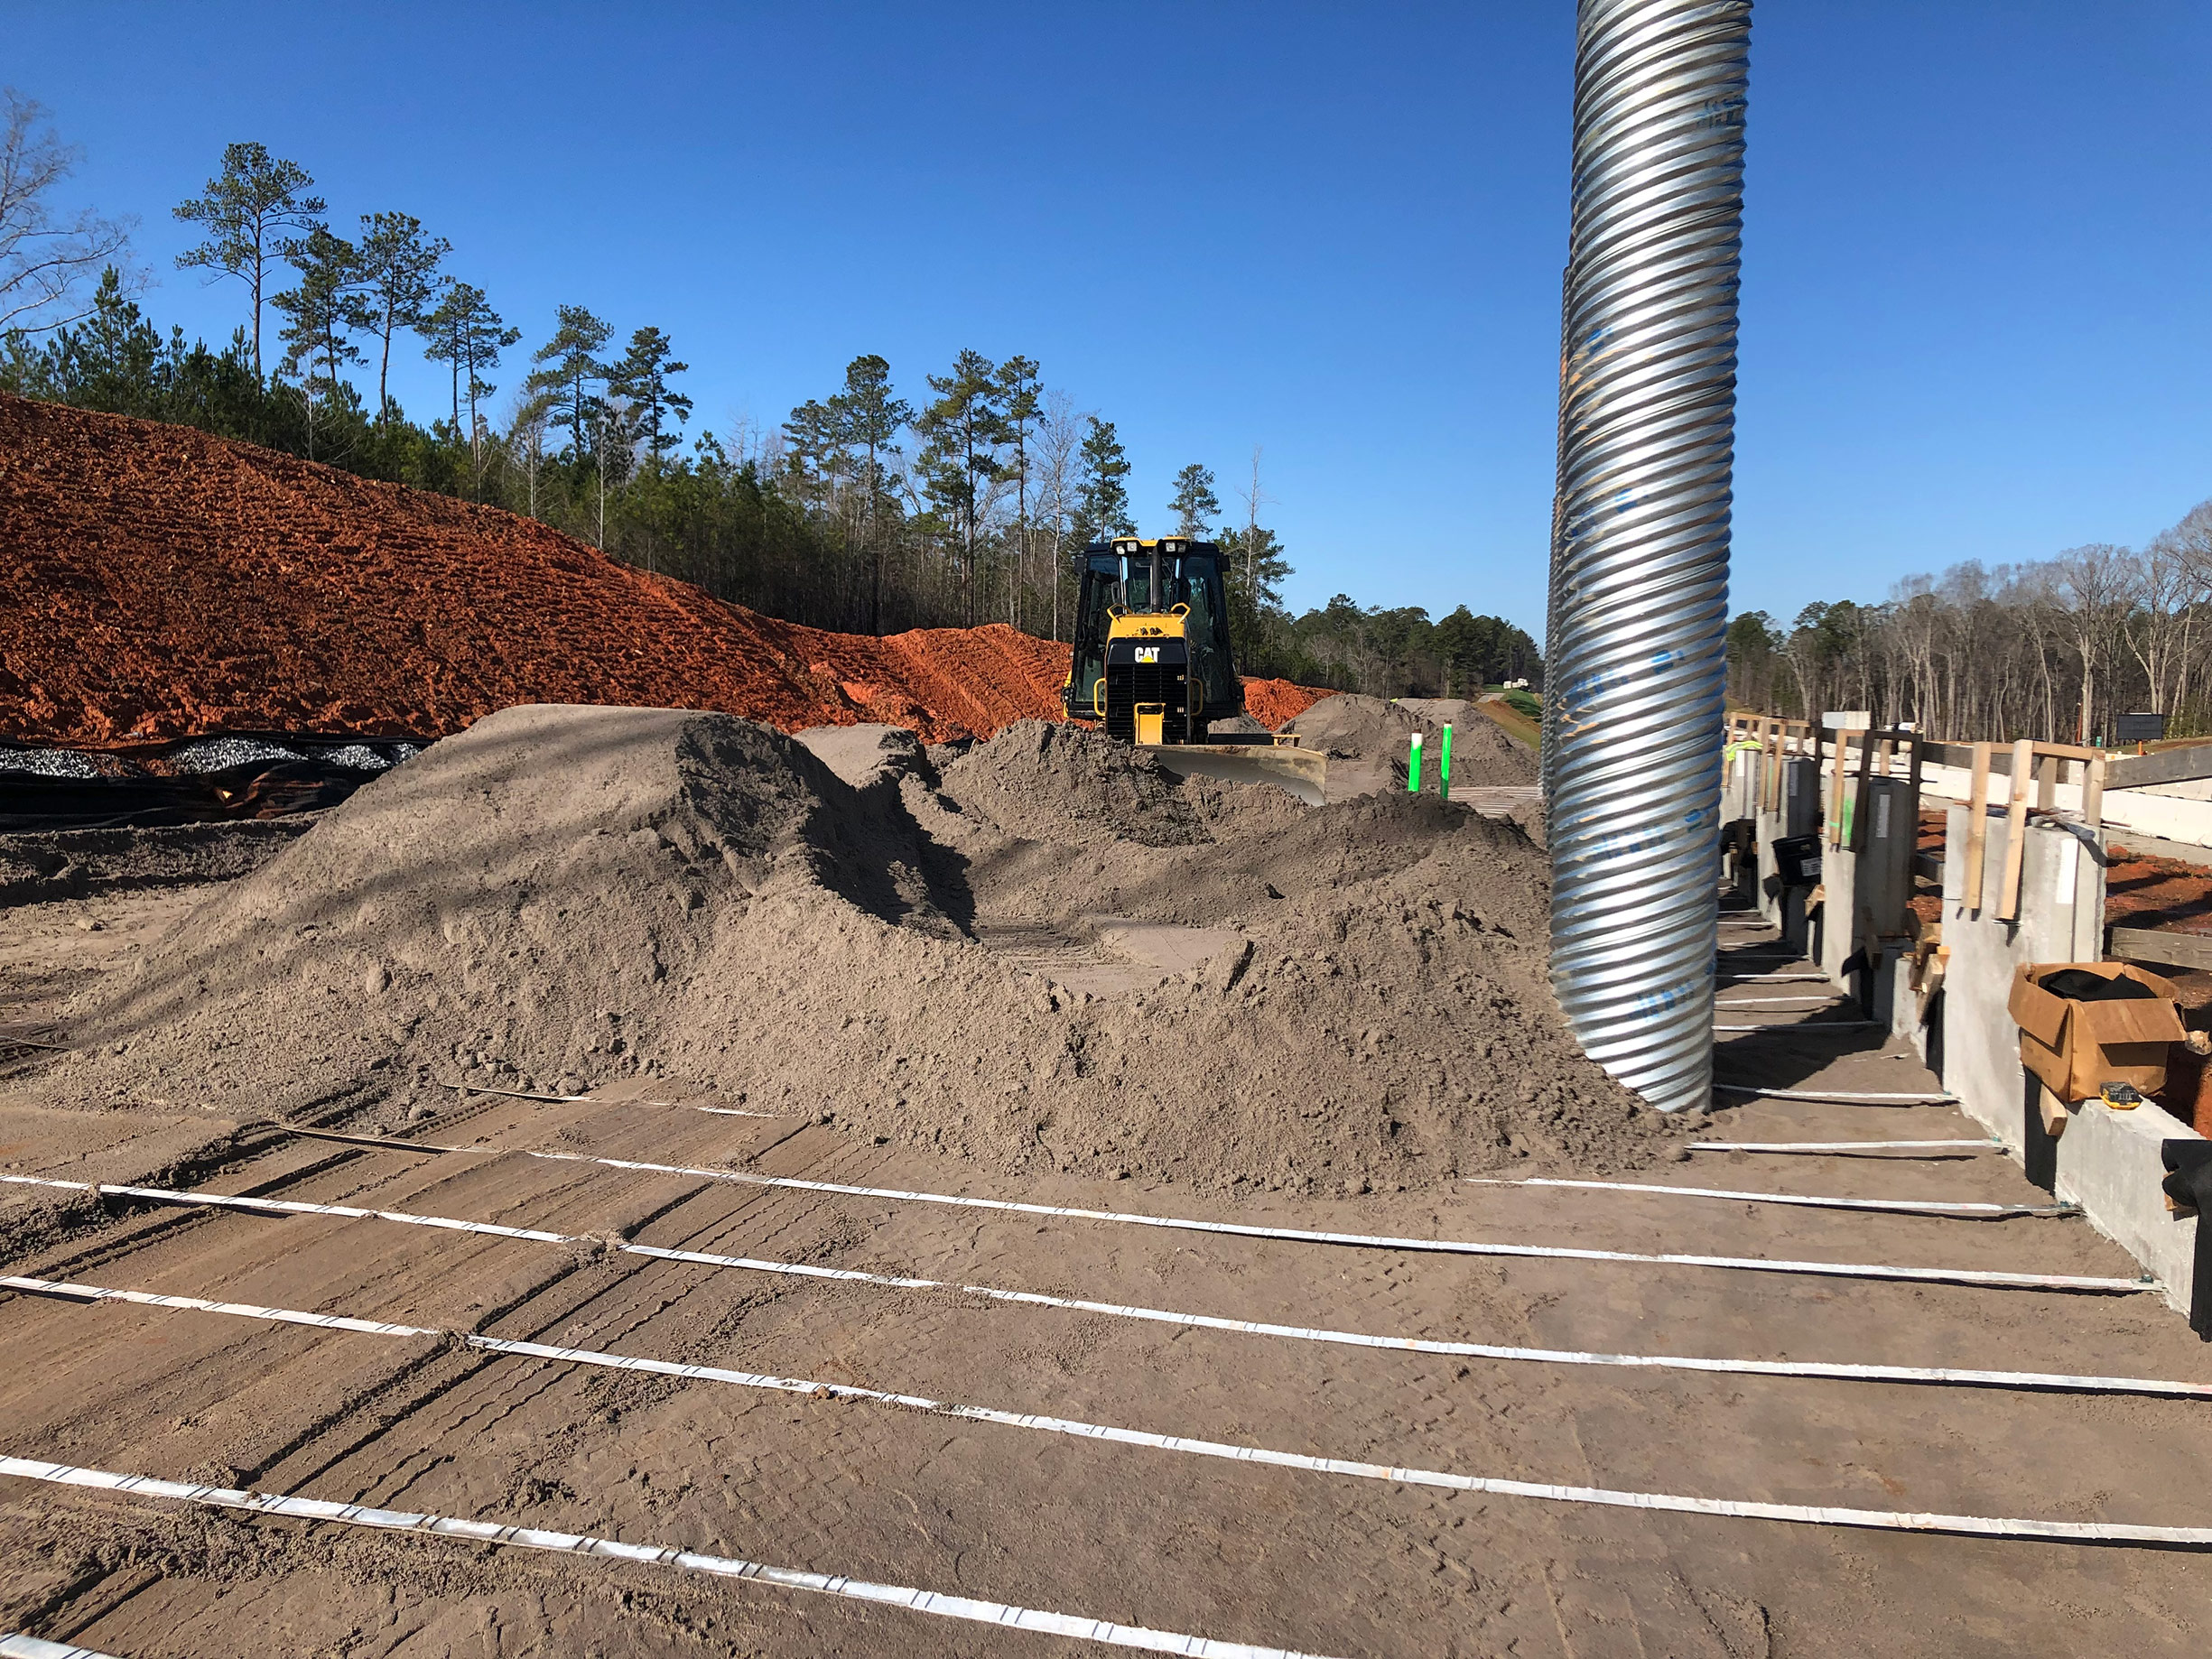 This photo shows construction of the retaining wall on the eastbound side of the I-26 for the future Columbia Avenue overpass at Exit 91.  Panels for the wall are secured in place with metal straps that are encased in compacted backfill.